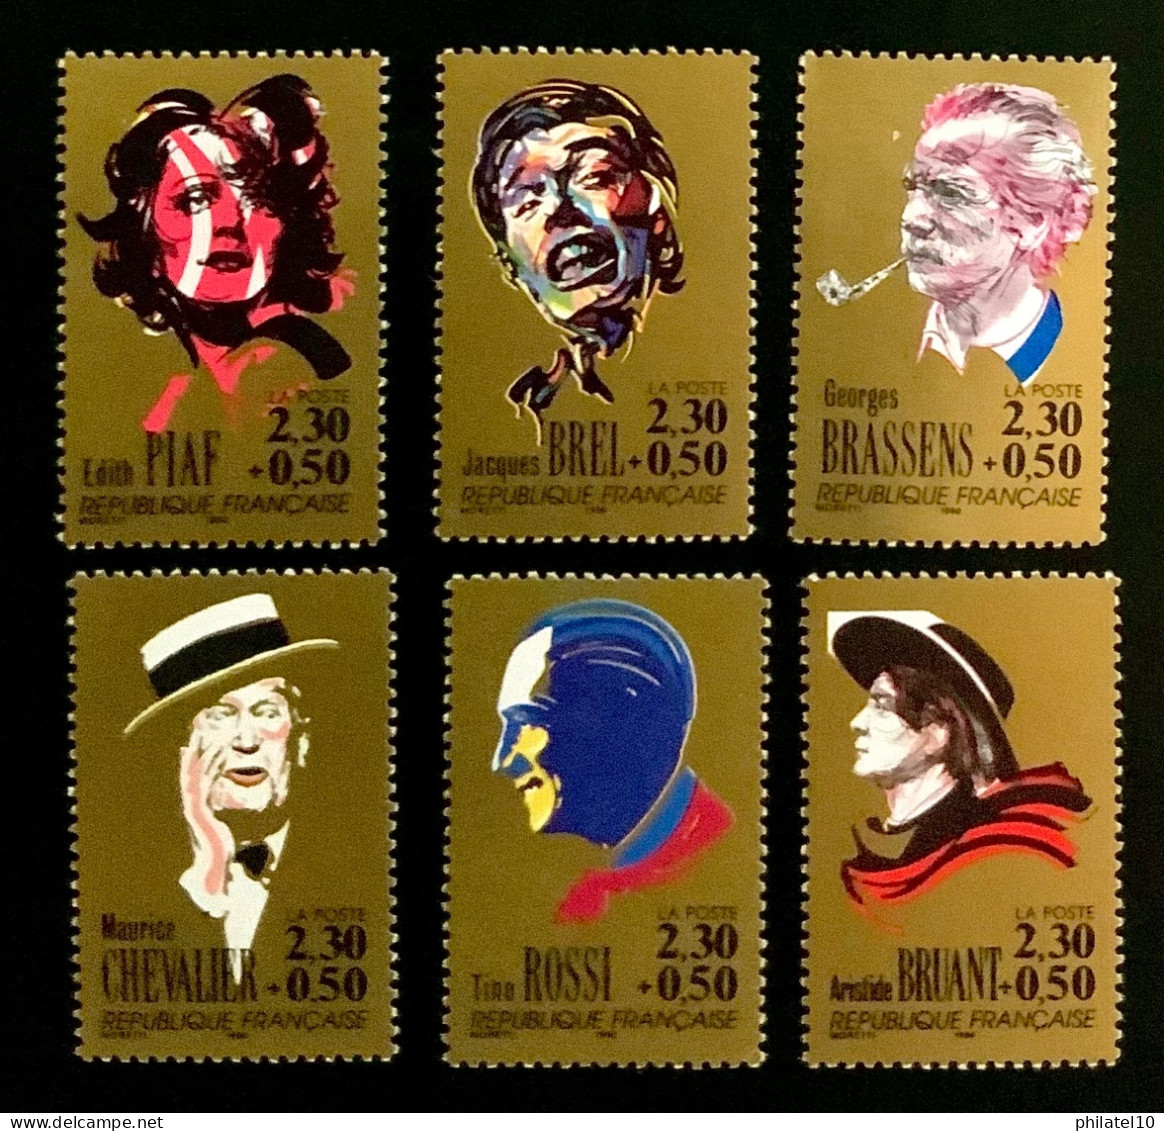 1990 FRANCE N 2649 / 2654 PERSONNAGES CÉLÈBRES - PIAF / BREL / BRASSENS / TINO ROSSI / CHEVALIER / BRUANT - NEUF** - Unused Stamps